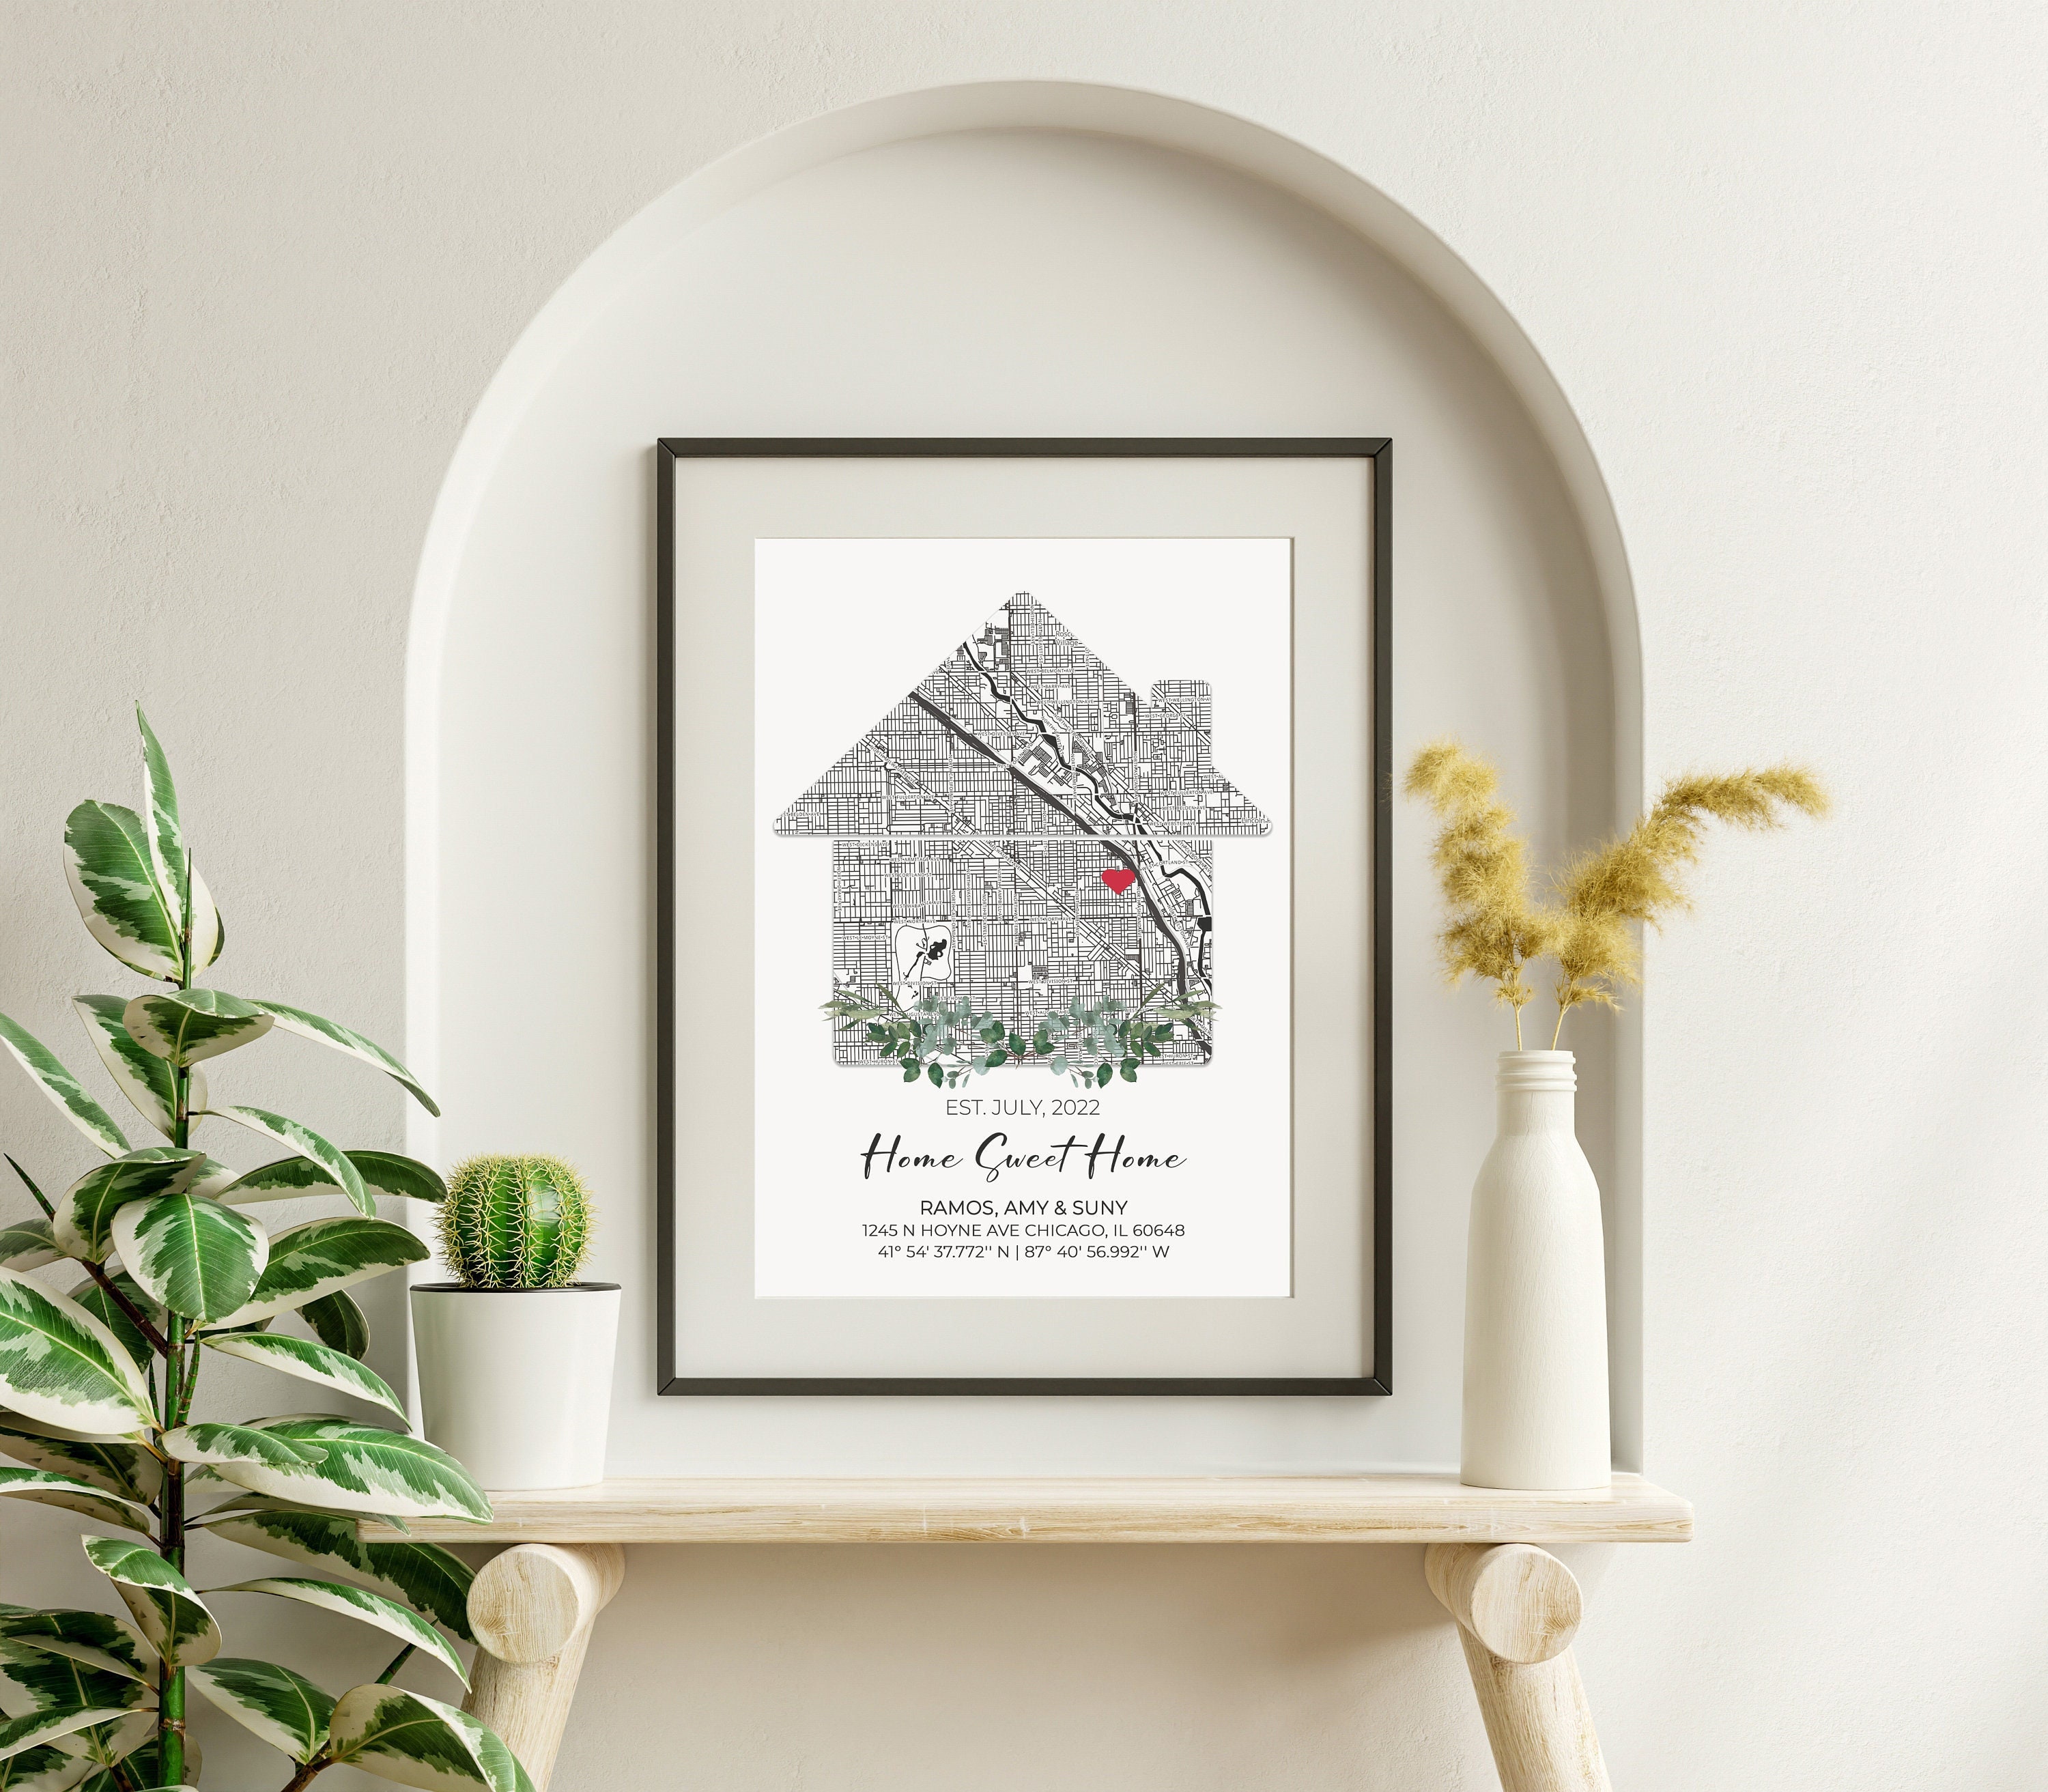 Housewarming Gift, Our First Home, House Map, First Home Gift for Couple,  Personalized Map Art, Personalized House Warming Gifts, New Home 